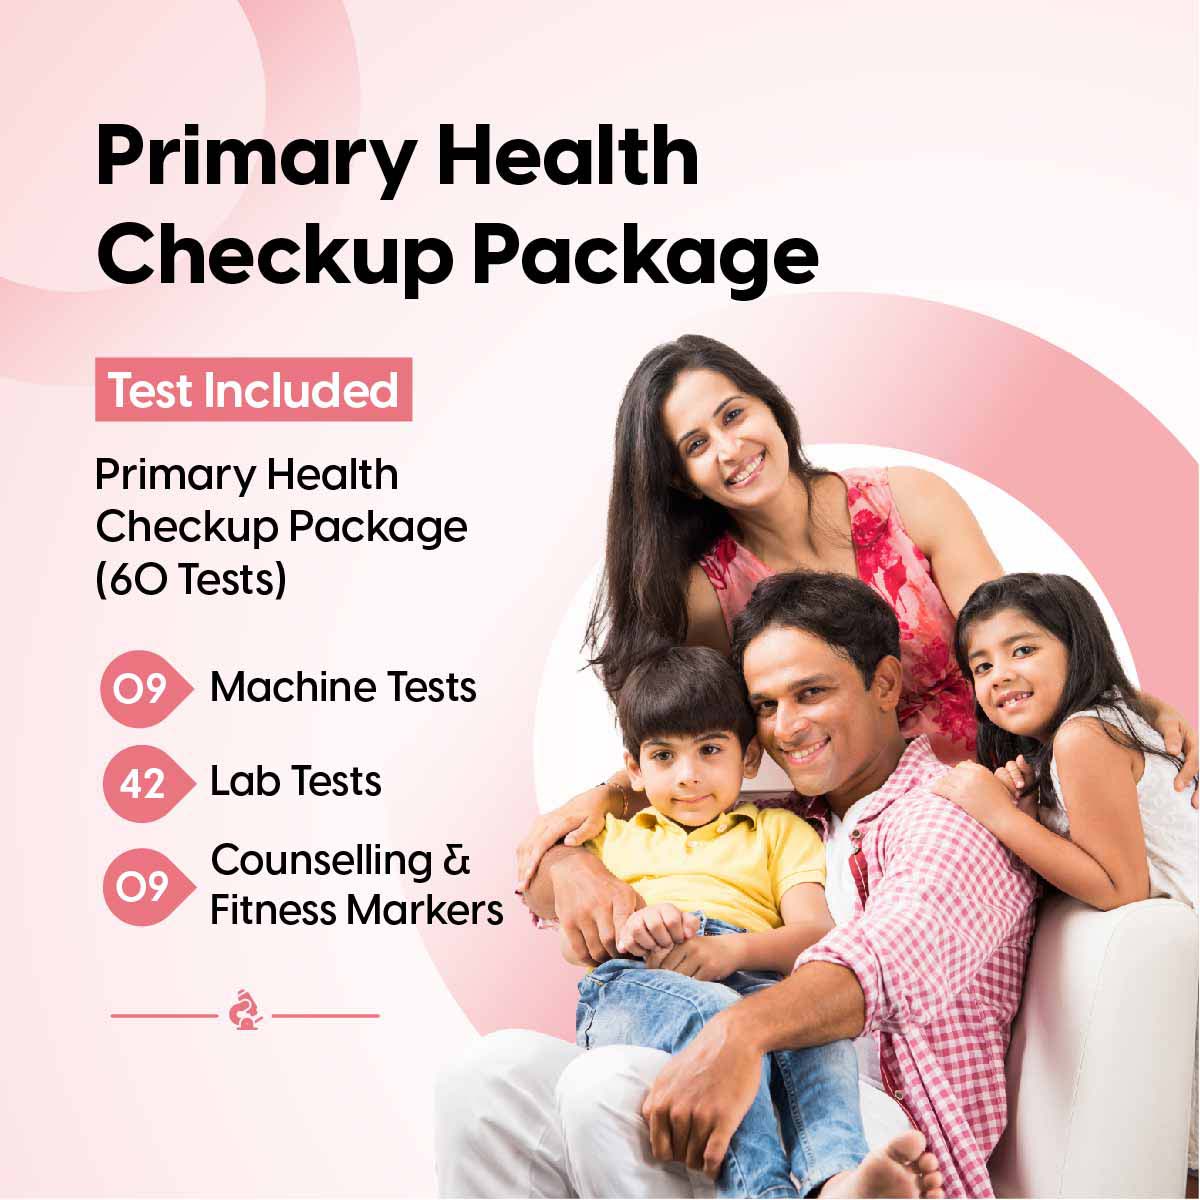 Primary Health Checkup Package for healthier lifestyle